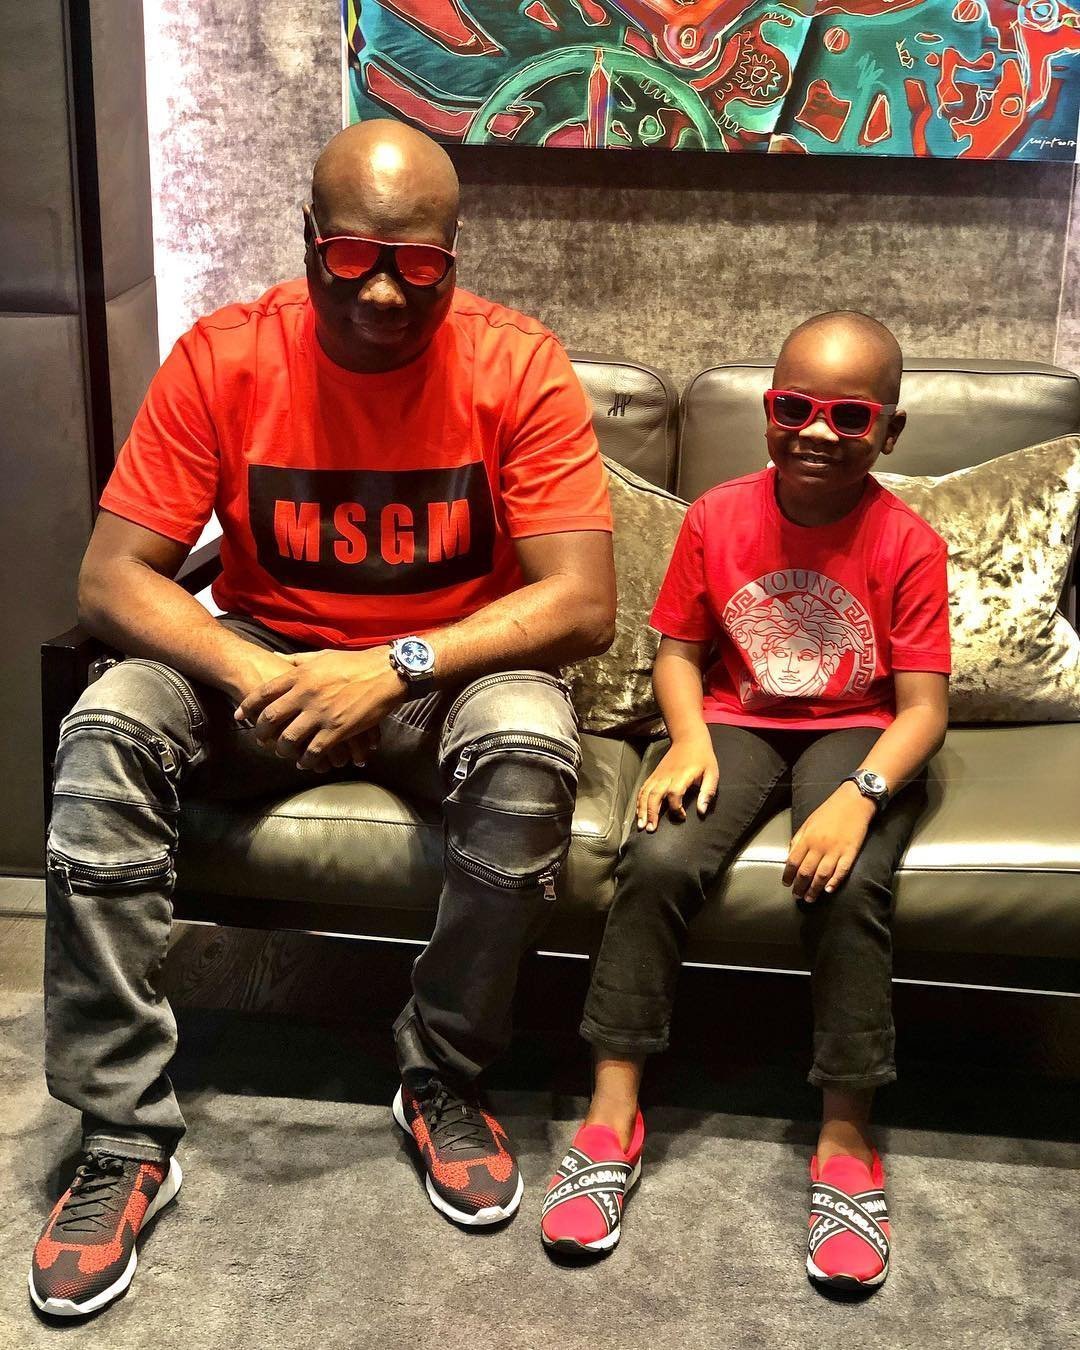 6-year-old Mompha Jnr. reportedly the youngest landlord in the world (Photos)